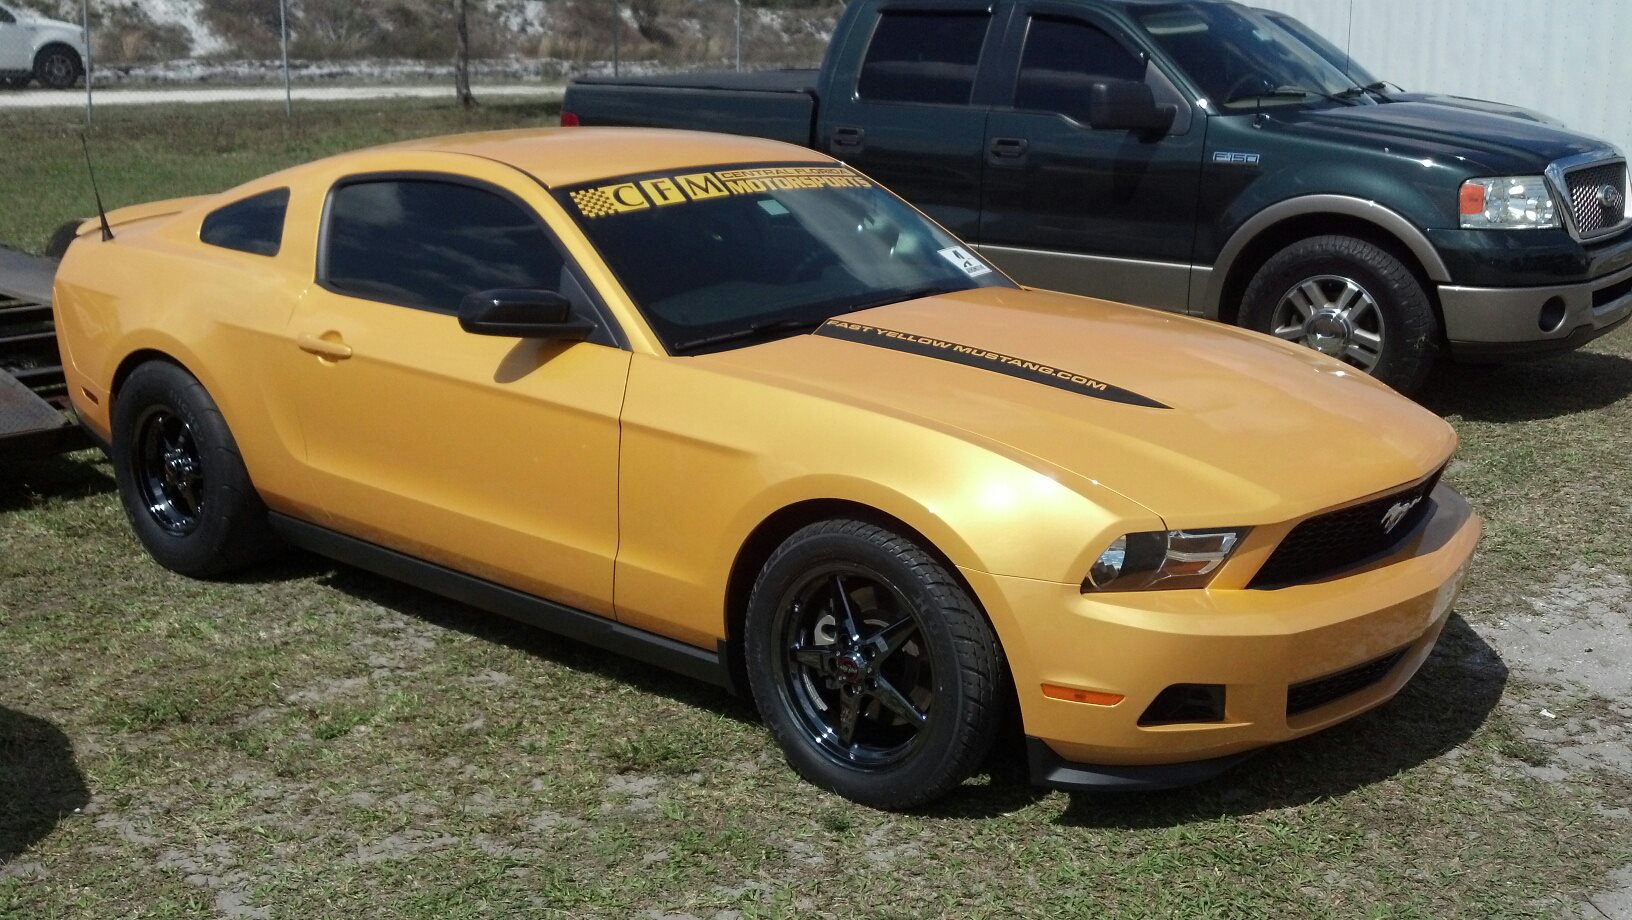 2011 Ford mustang gt quarter mile time #10